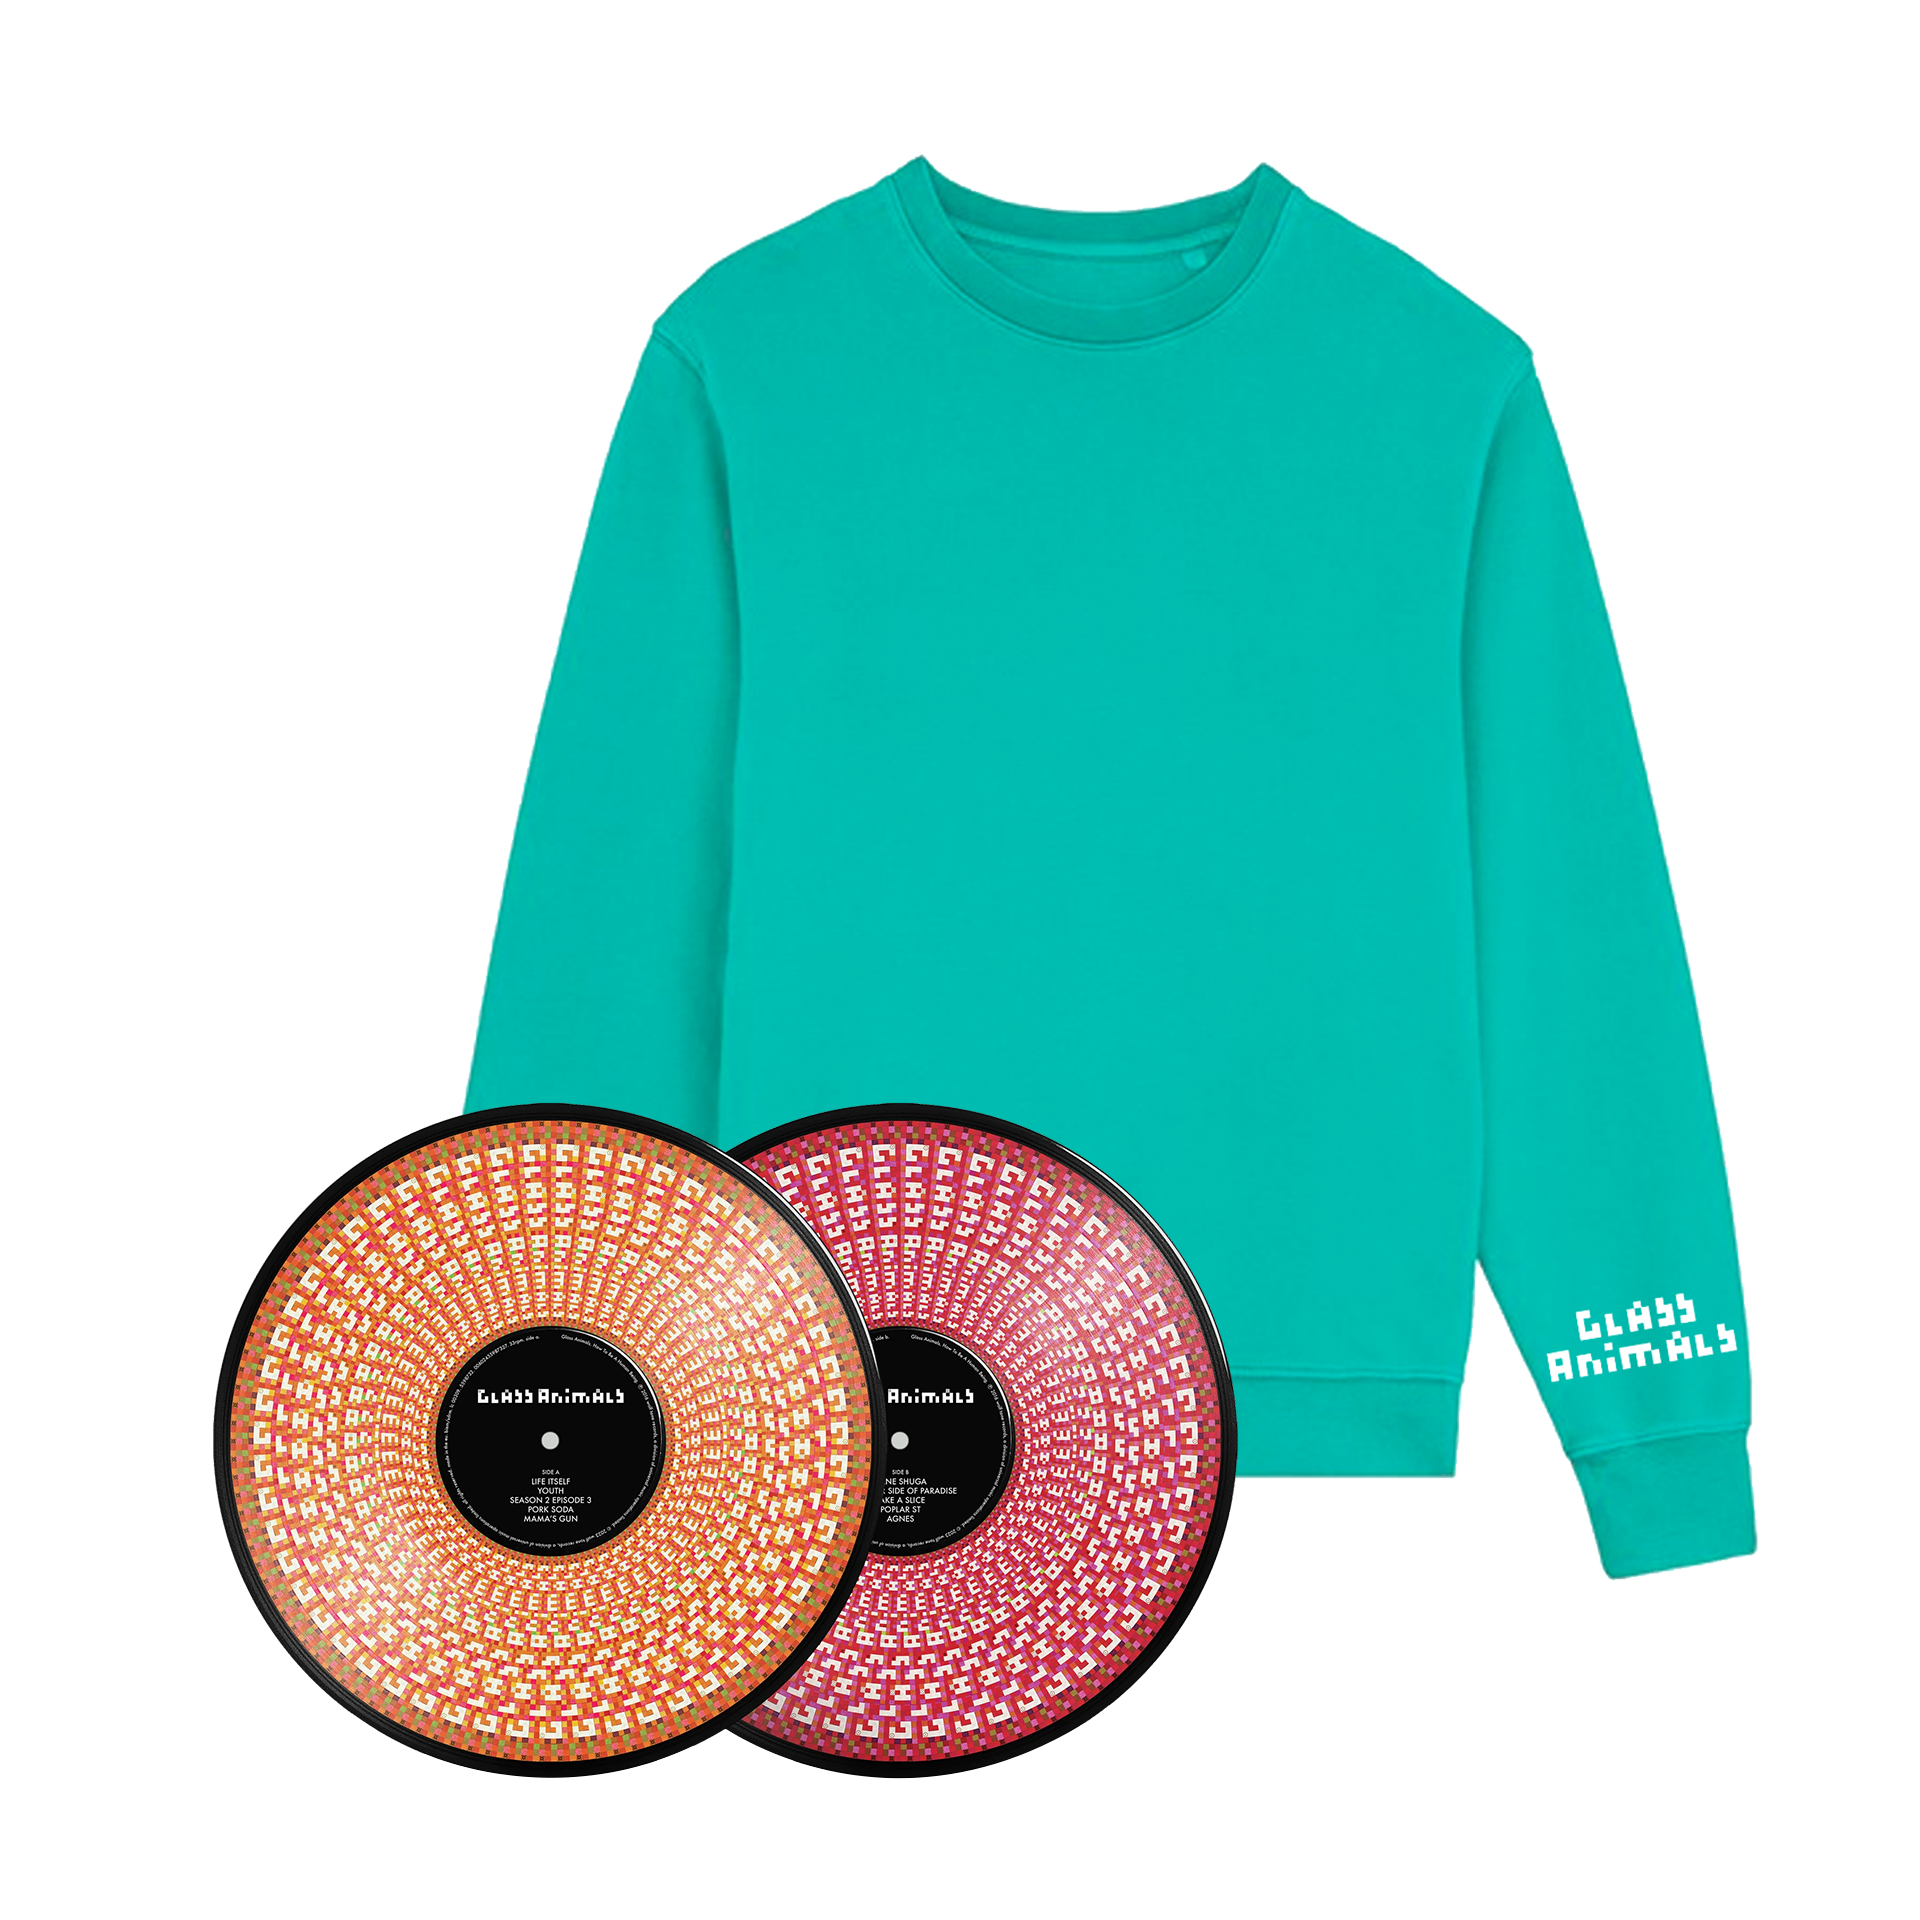 How To Be A Human Being: Zoetrope Vinyl 1LP + Sweatshirt